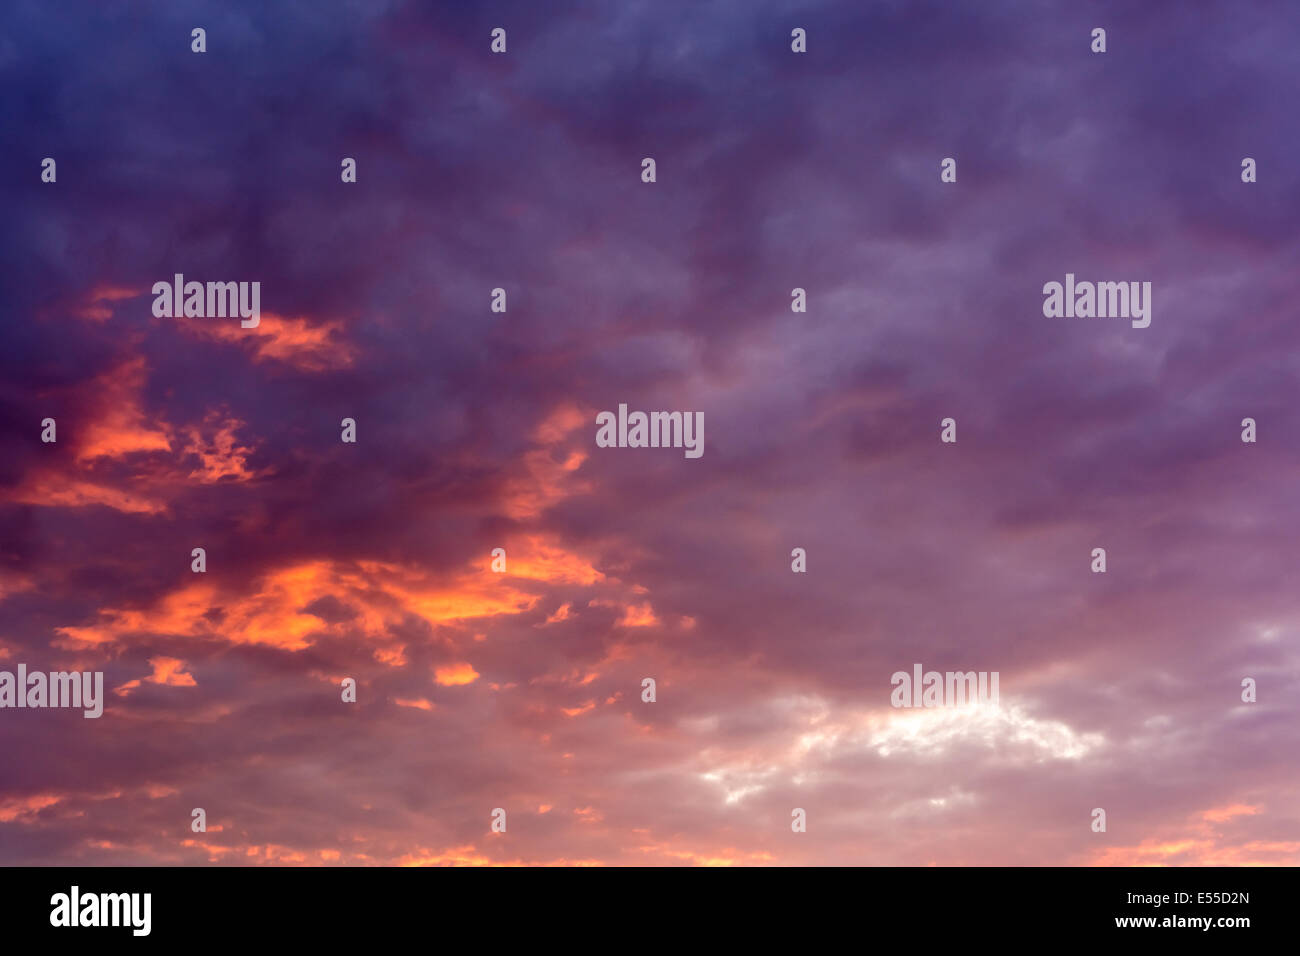 Orange And Purple Sunset Summer Sky With Clouds Stock Photo